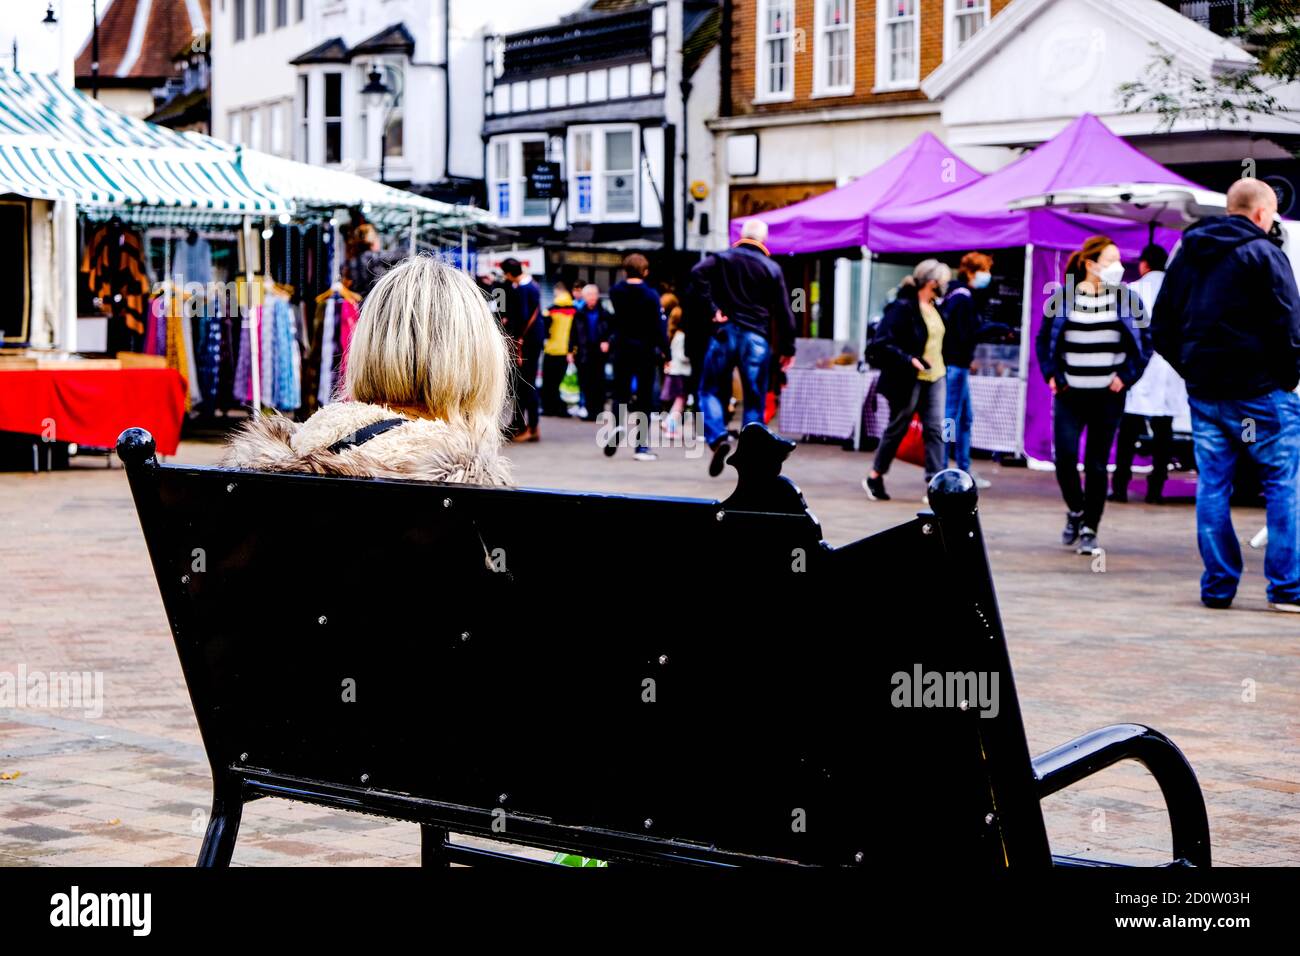 london-uk-october-03-2020-woman-sitting-alone-in-epsom-market-people-watching-during-covid-19-2D0W03H.jpg